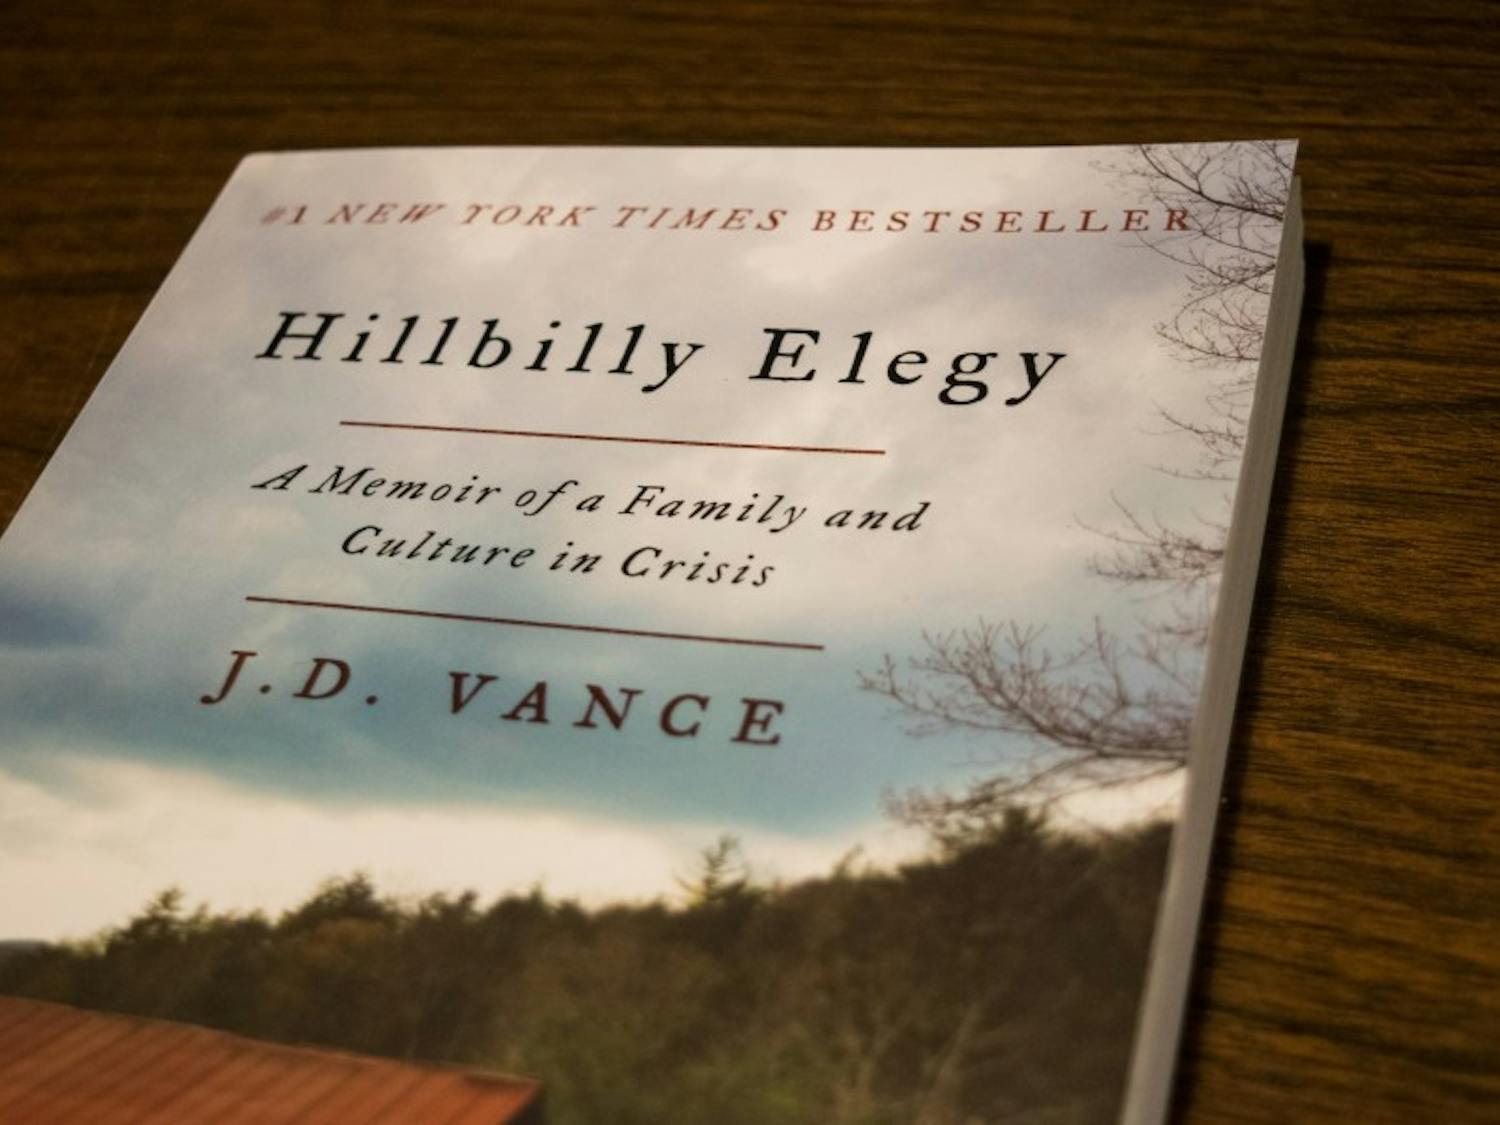 Three UW-Madison experts will sit on a panel to discuss the themes of J.D. Vance’s “Hillbilly Elegy.”